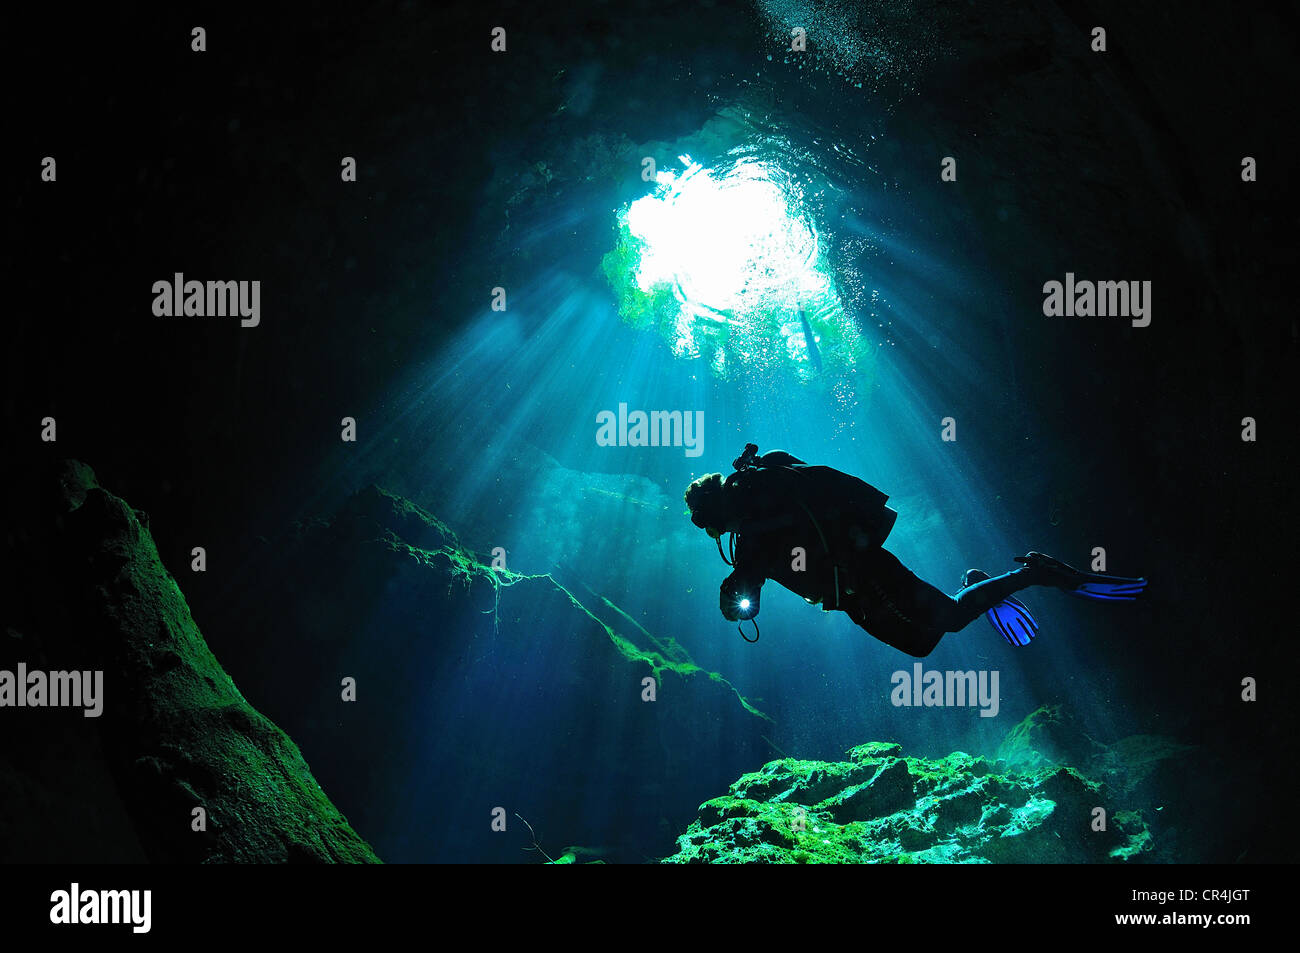 Mexico, Quintana Roo State, the cenote (flooded cave) of Taj Mahal, underwater view Stock Photo